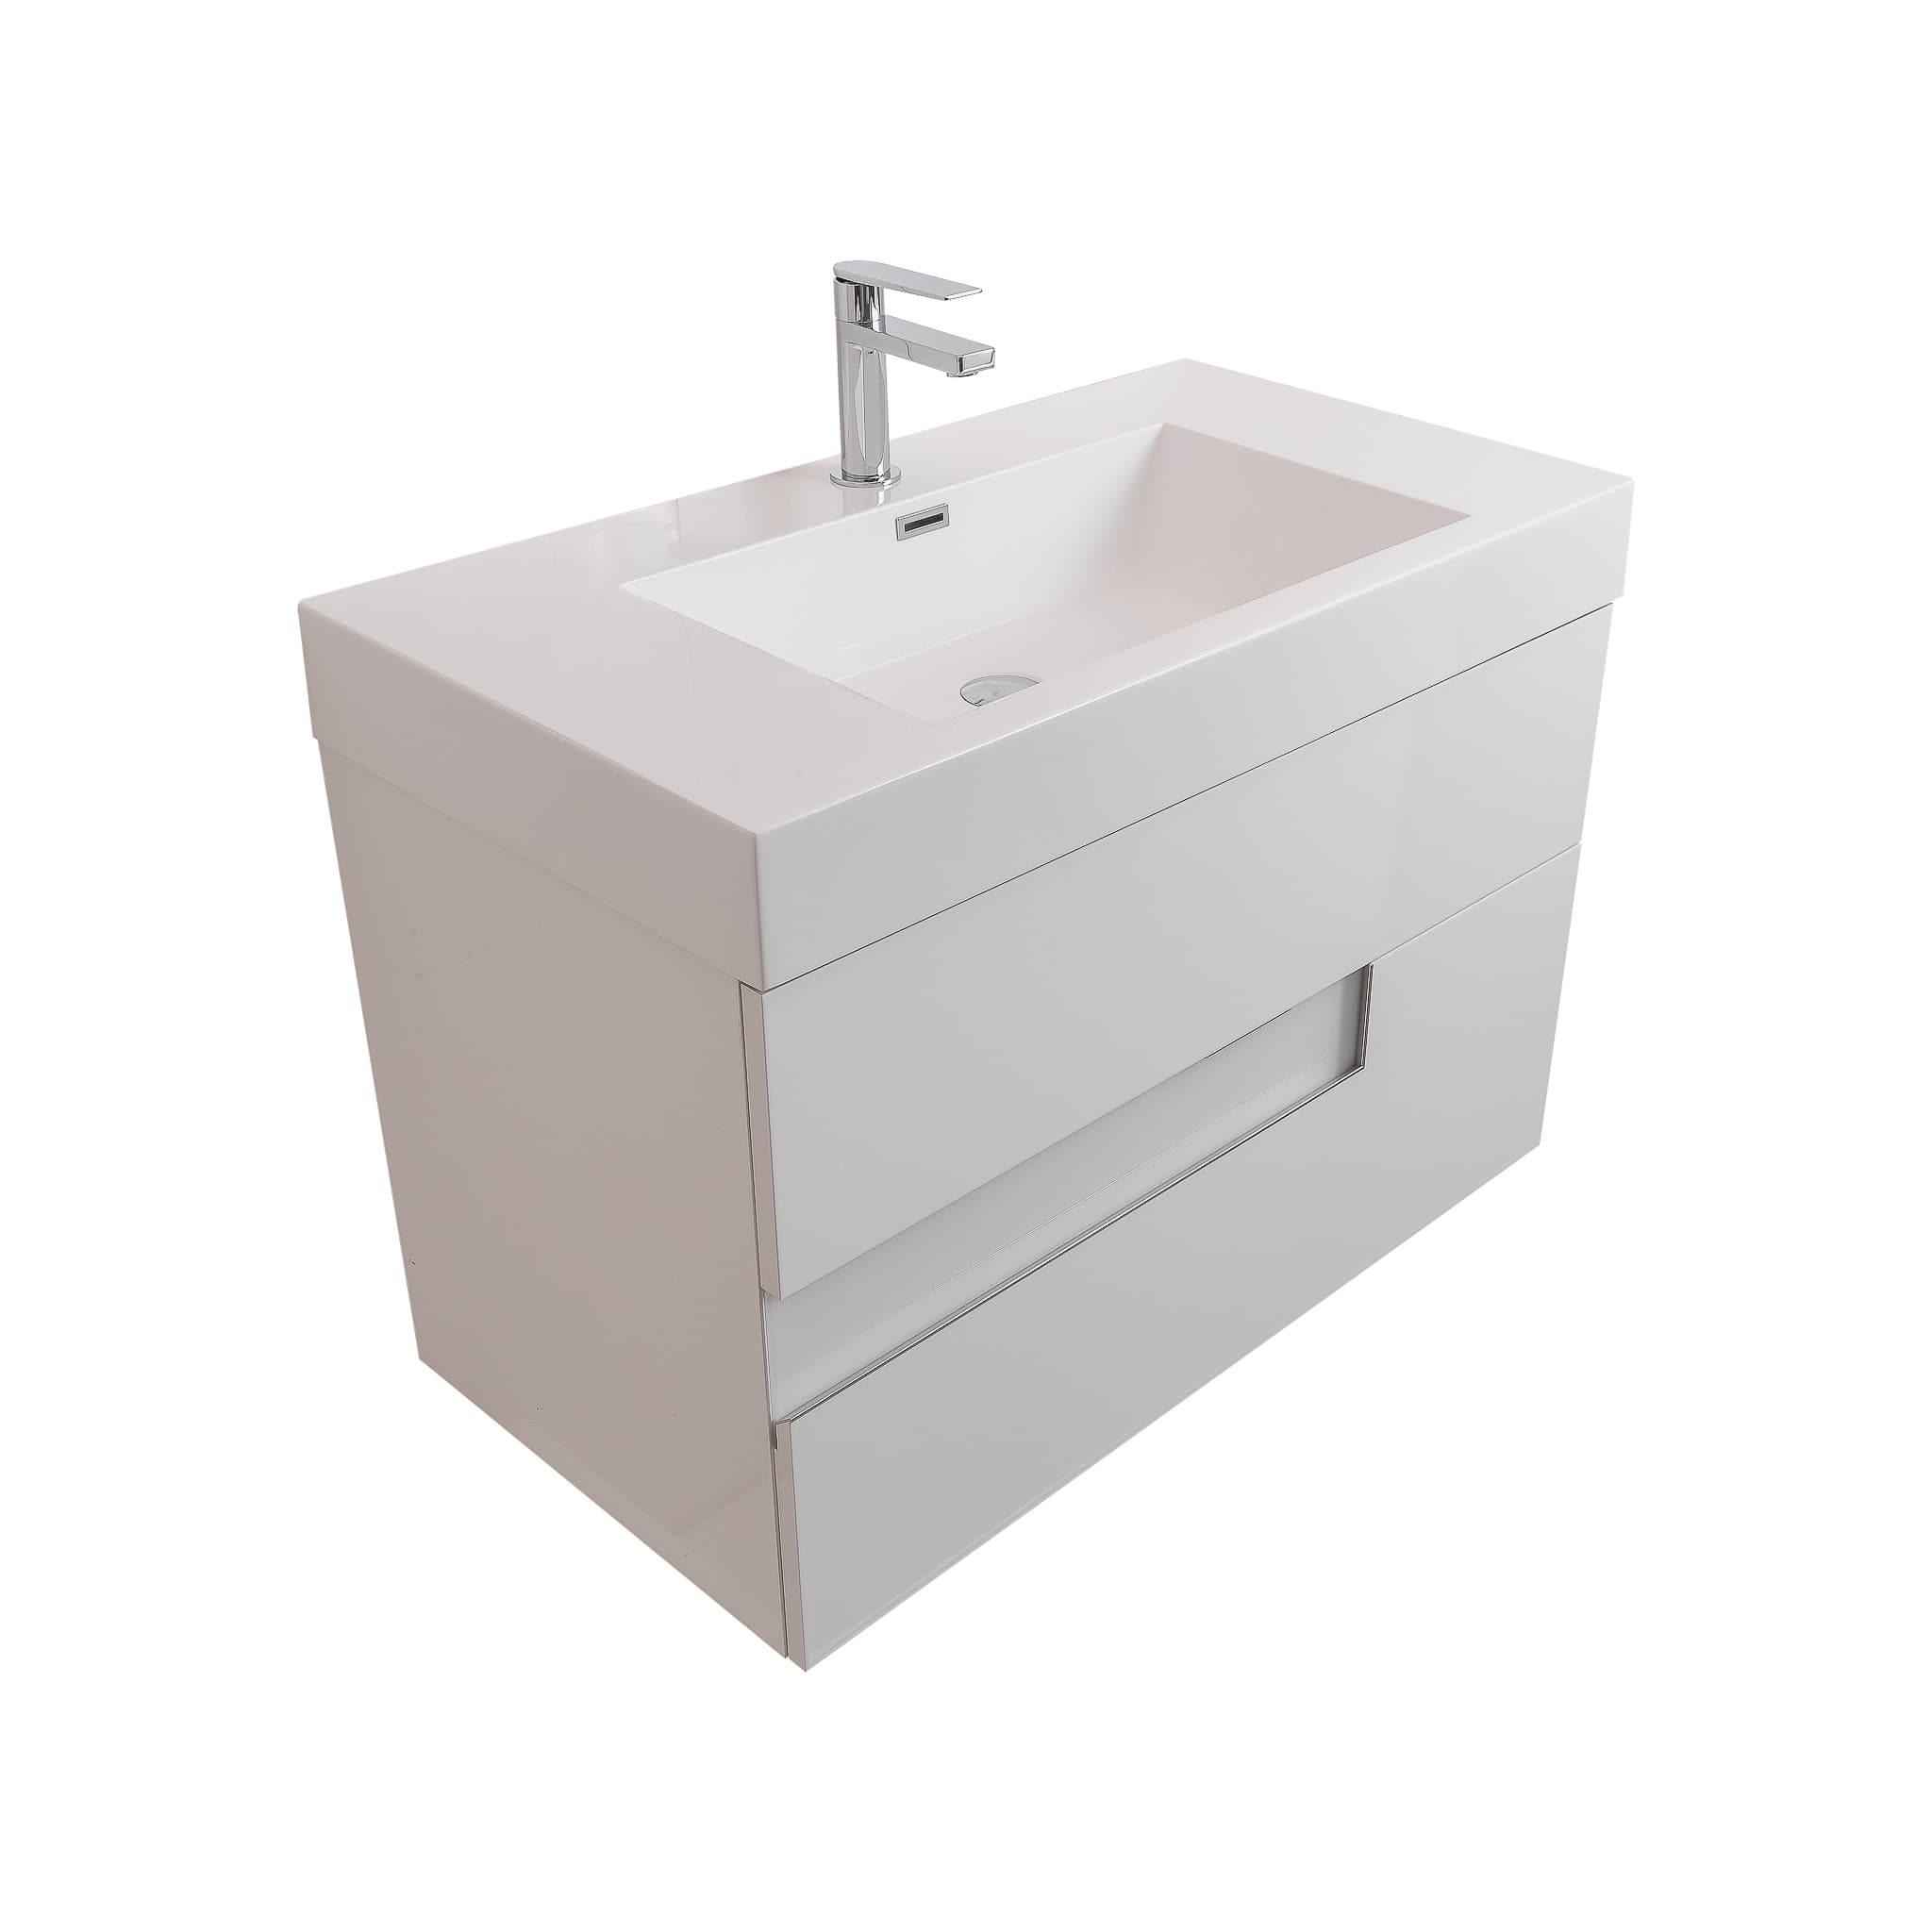 Vision 31.5 White High Gloss Cabinet, Square Cultured Marble Sink, Wall Mounted Modern Vanity Set